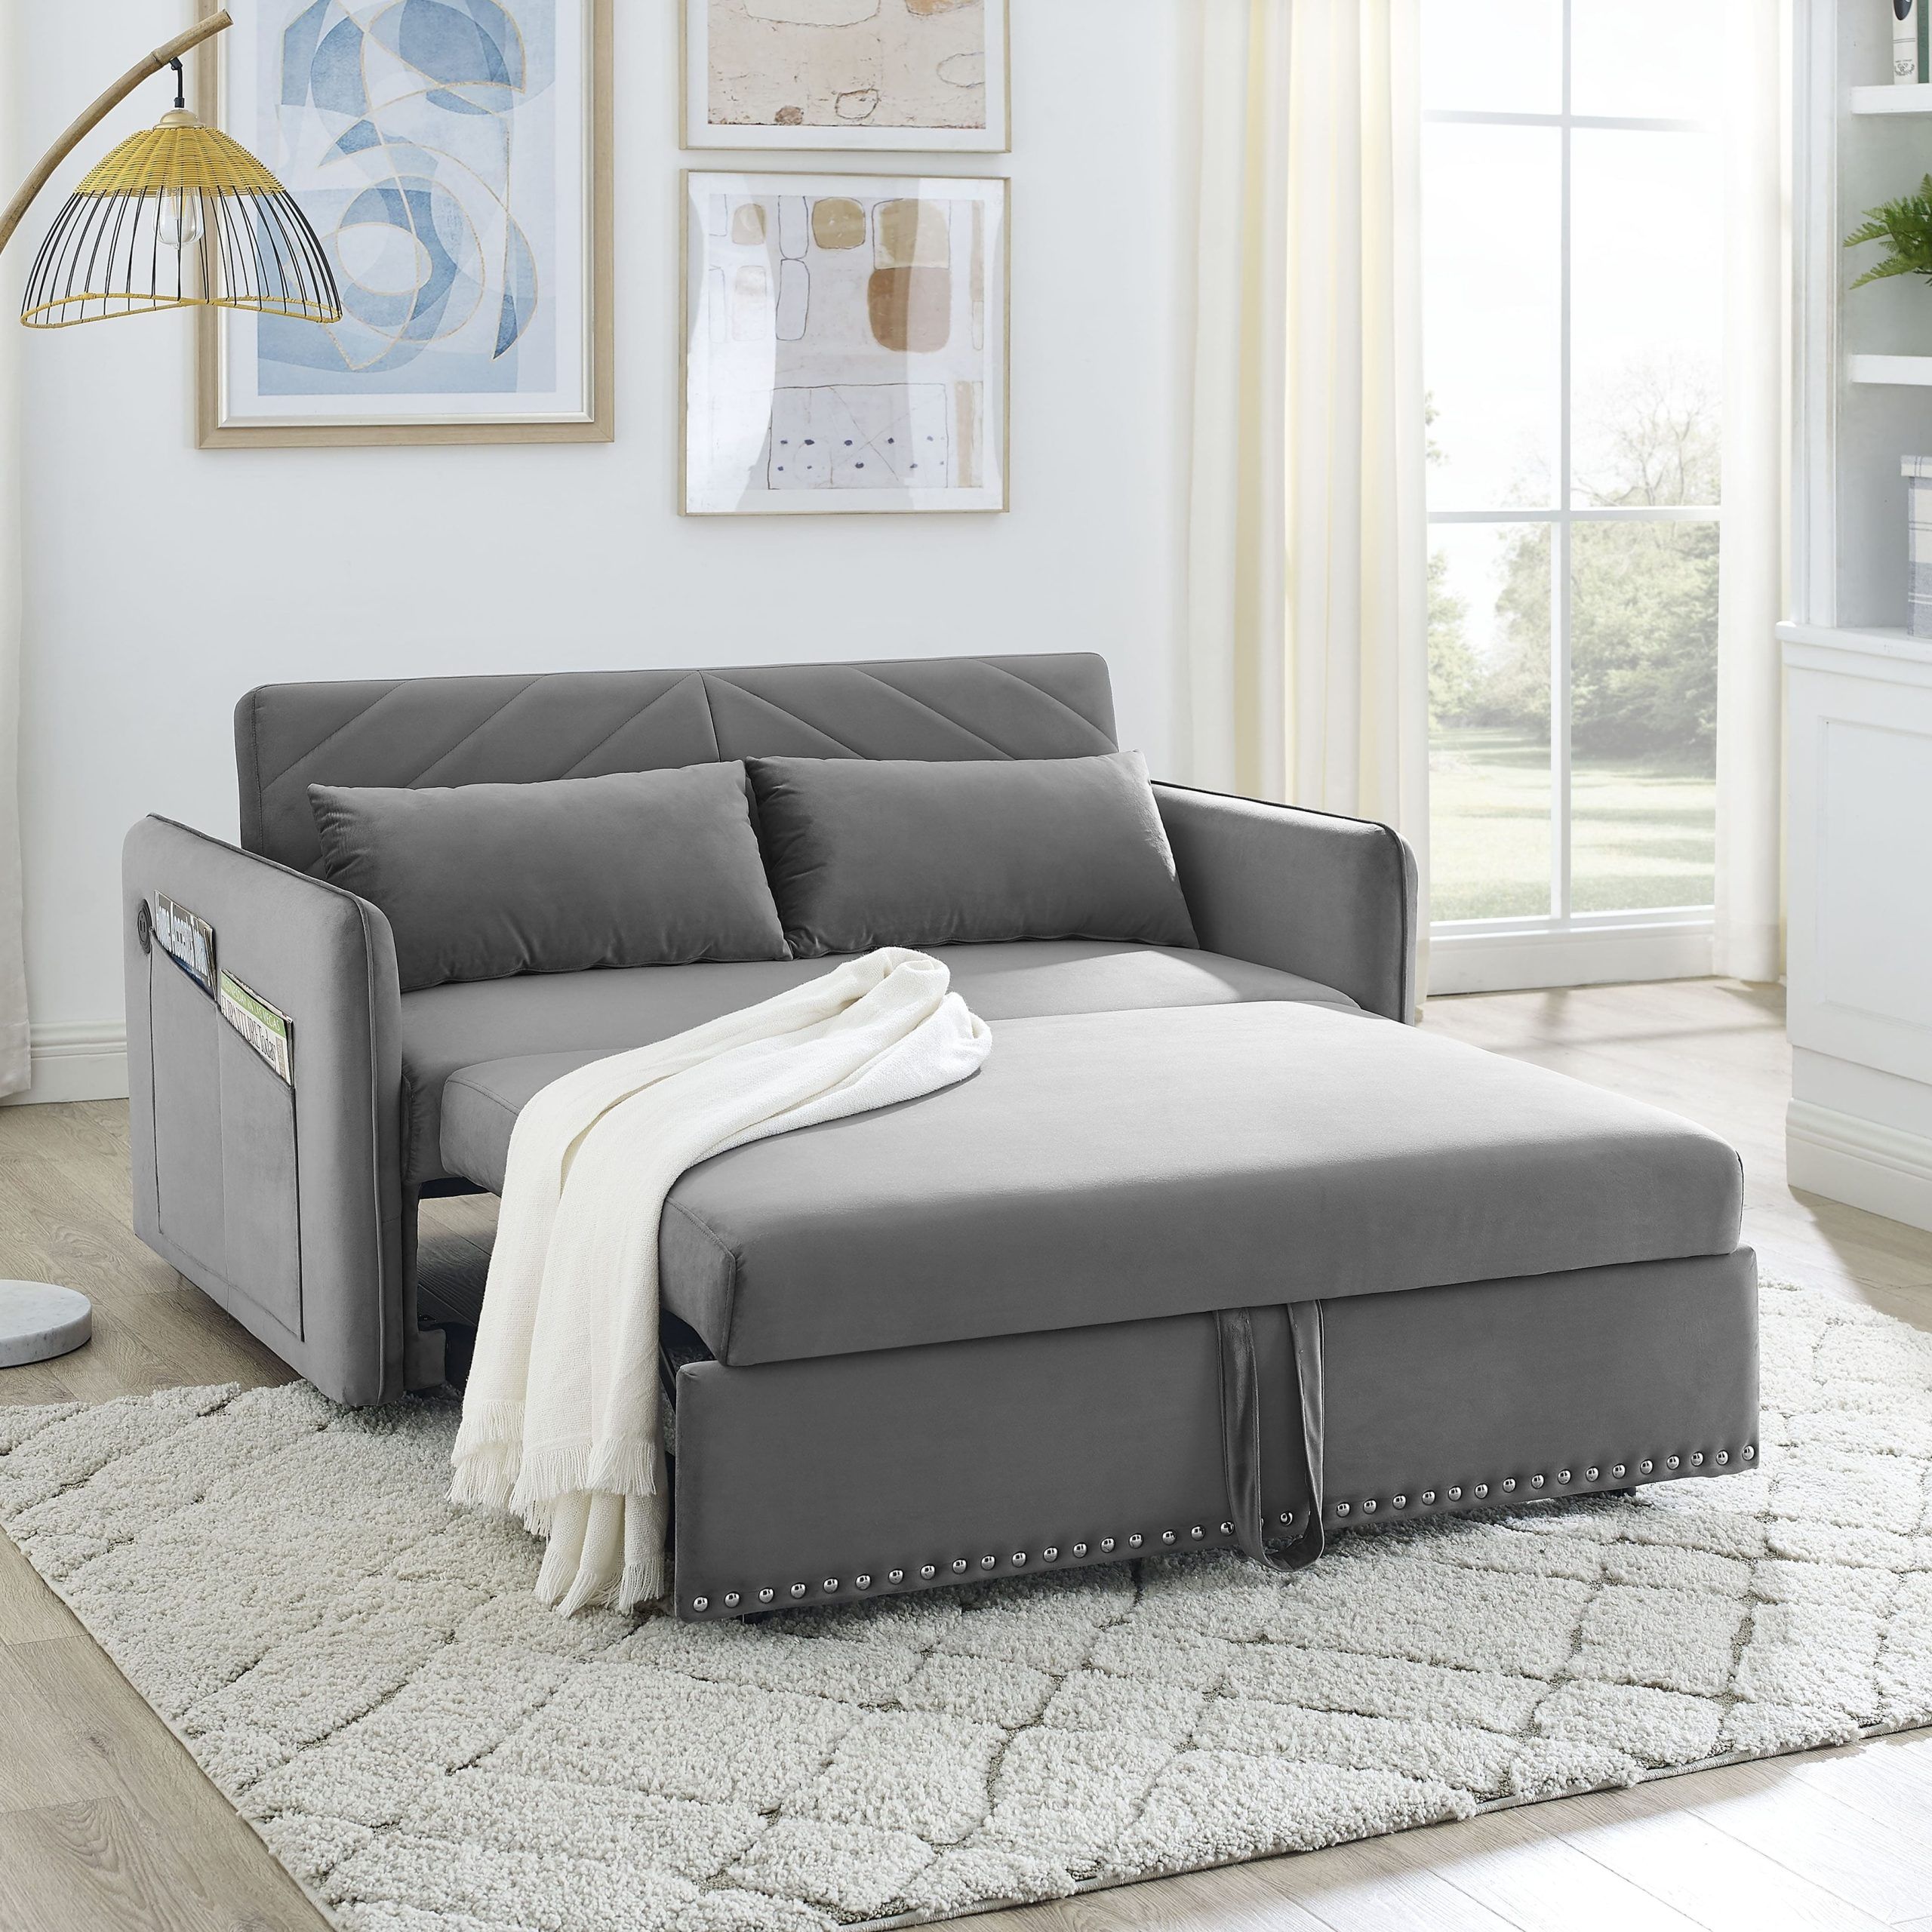 Velvet Pull Out Sleeper Sofa , 3 In 1 Adjustable Sleeper With Pull Out Bed,  2 Lumbar Pillows And Side Pocket – Bed Bath & Beyond – 38084240 Pertaining To 3 In 1 Gray Pull Out Sleeper Sofas (Photo 2 of 15)